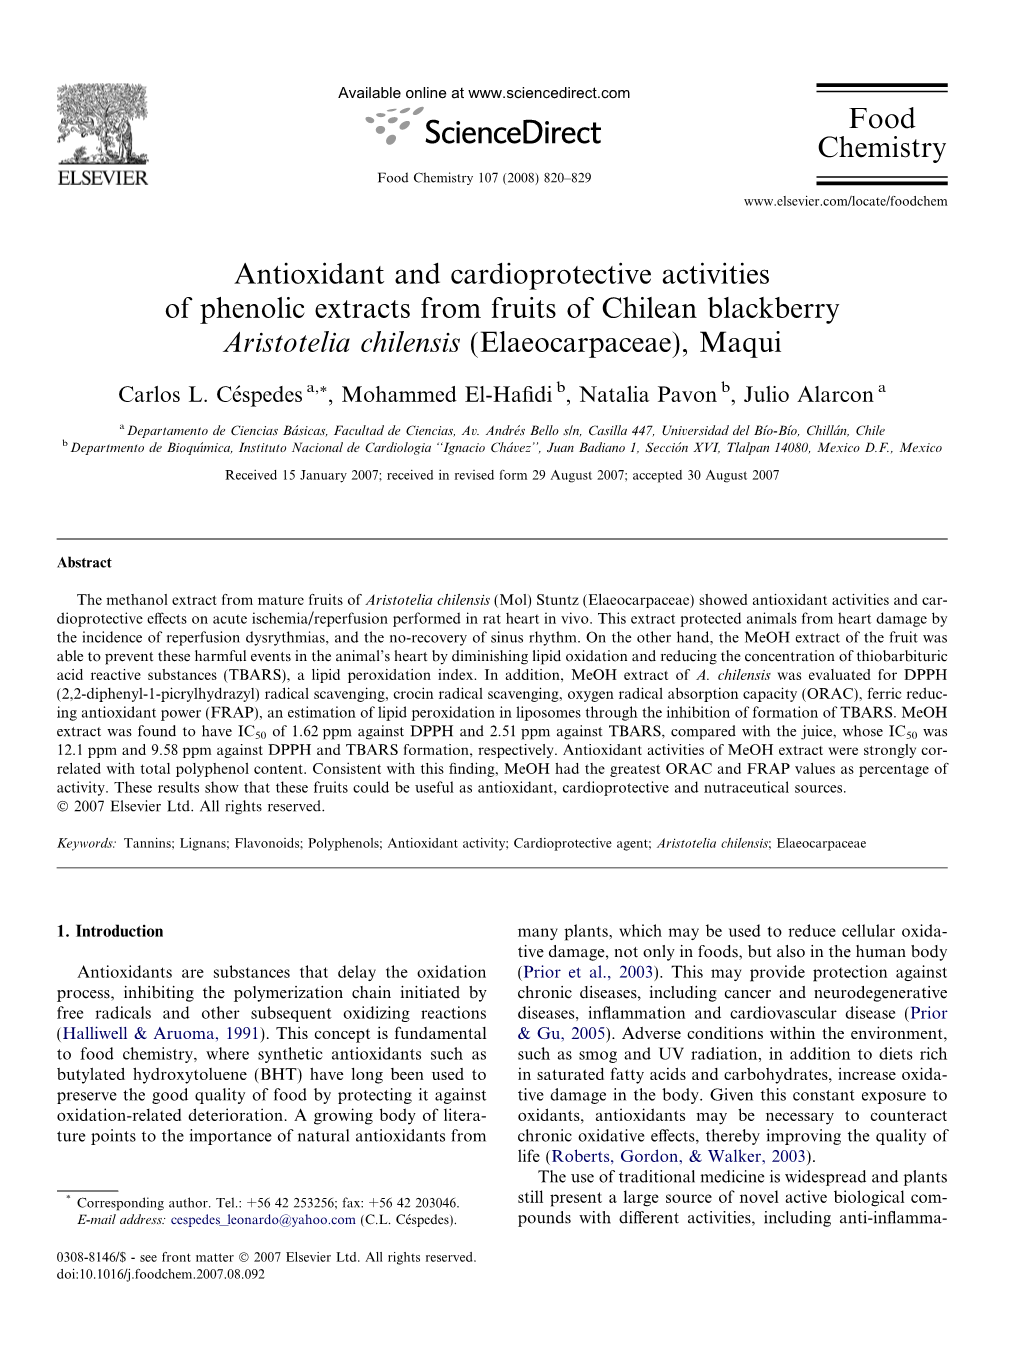 Antioxidant and Cardioprotective Activities of Phenolic Extracts from Fruits of Chilean Blackberry Aristotelia Chilensis (Elaeocarpaceae), Maqui